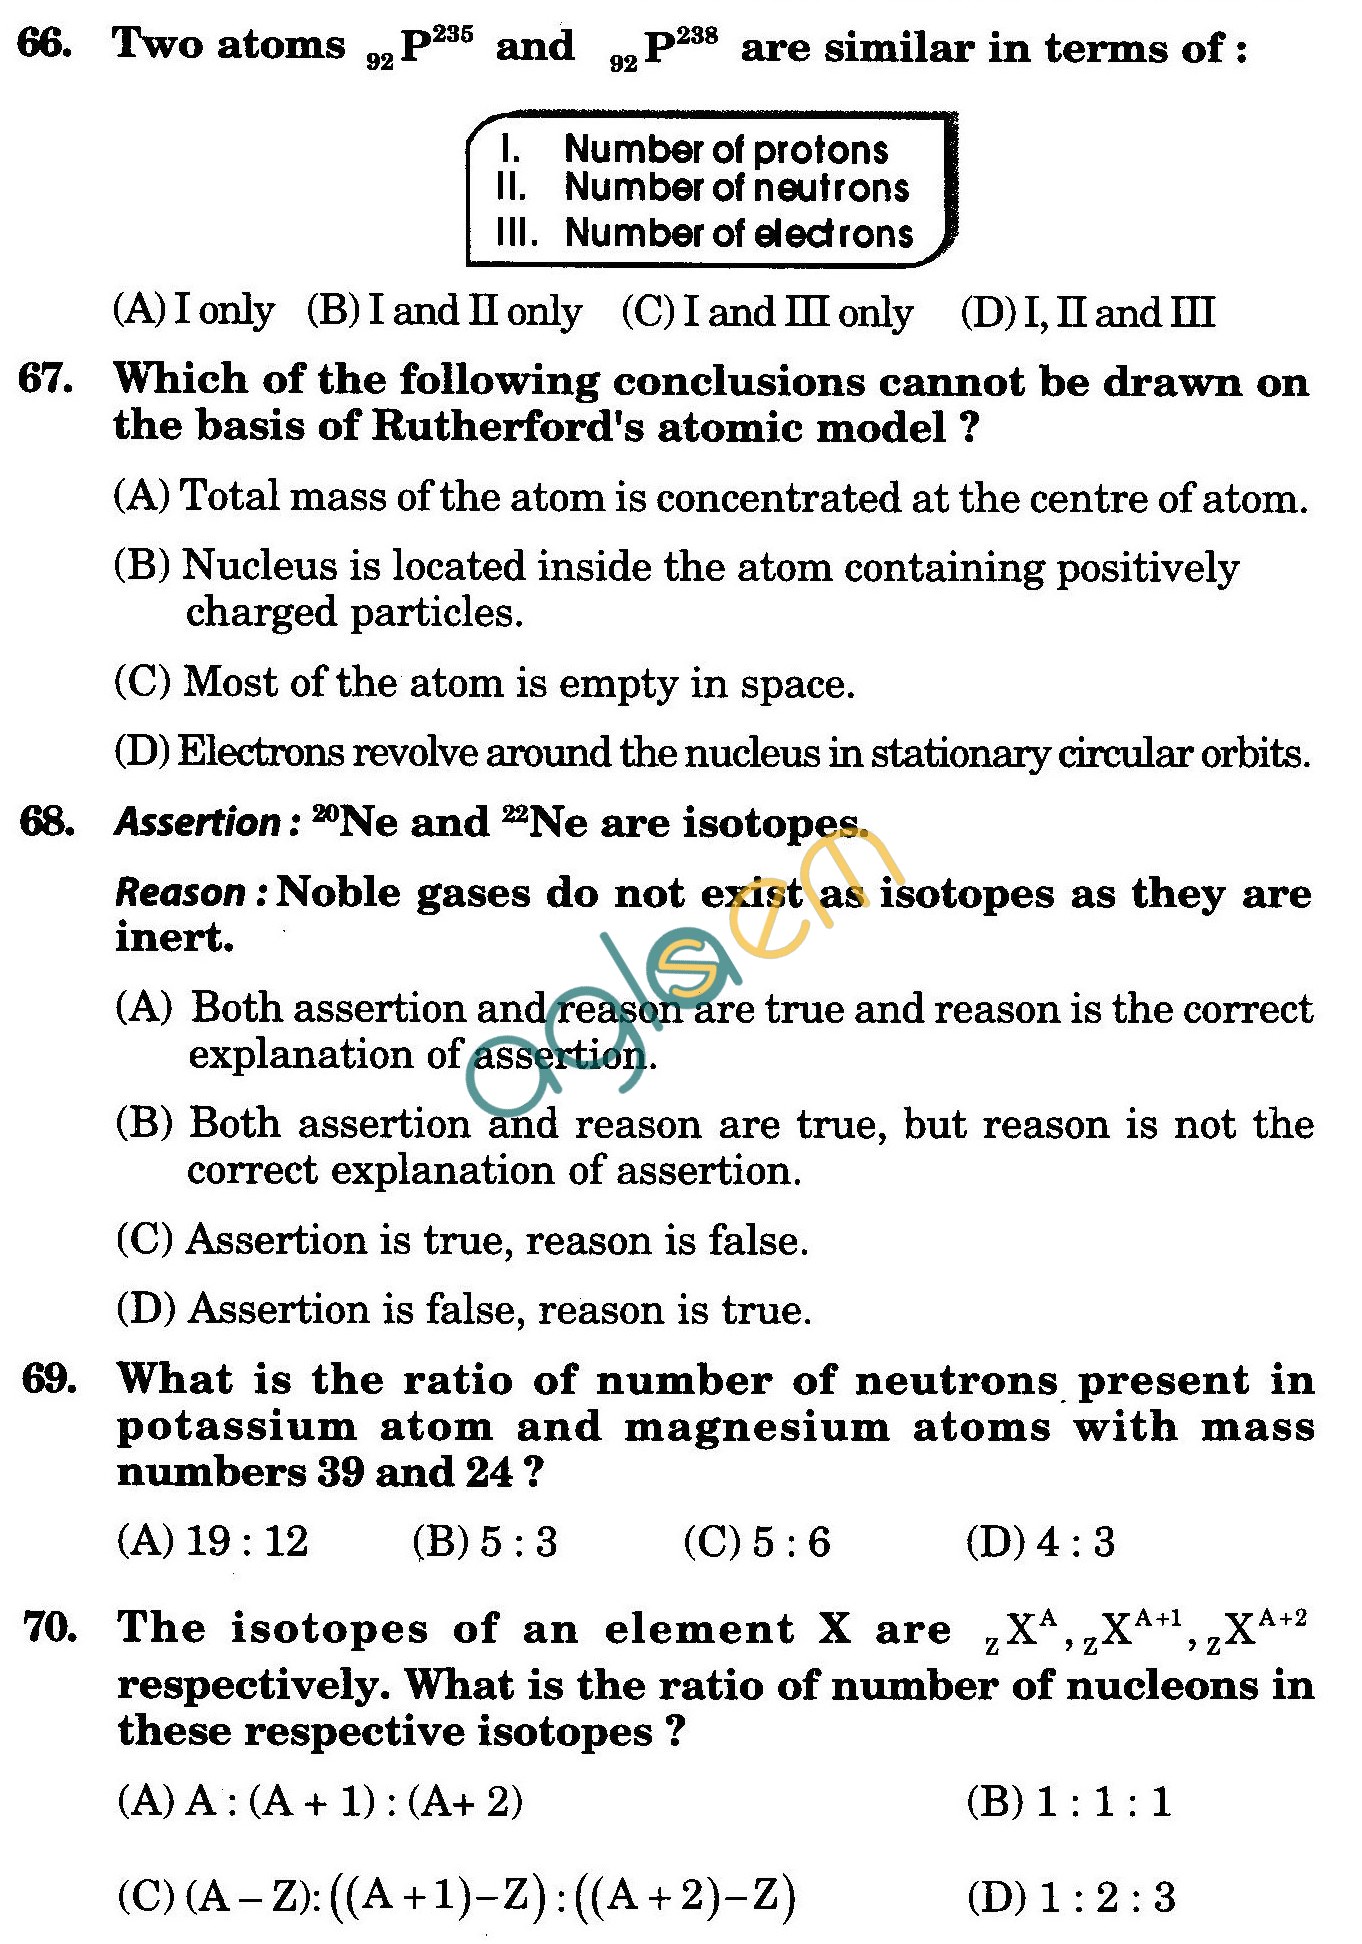 NSTSE 2010: Class IX Question Paper with Answers - Chemistry